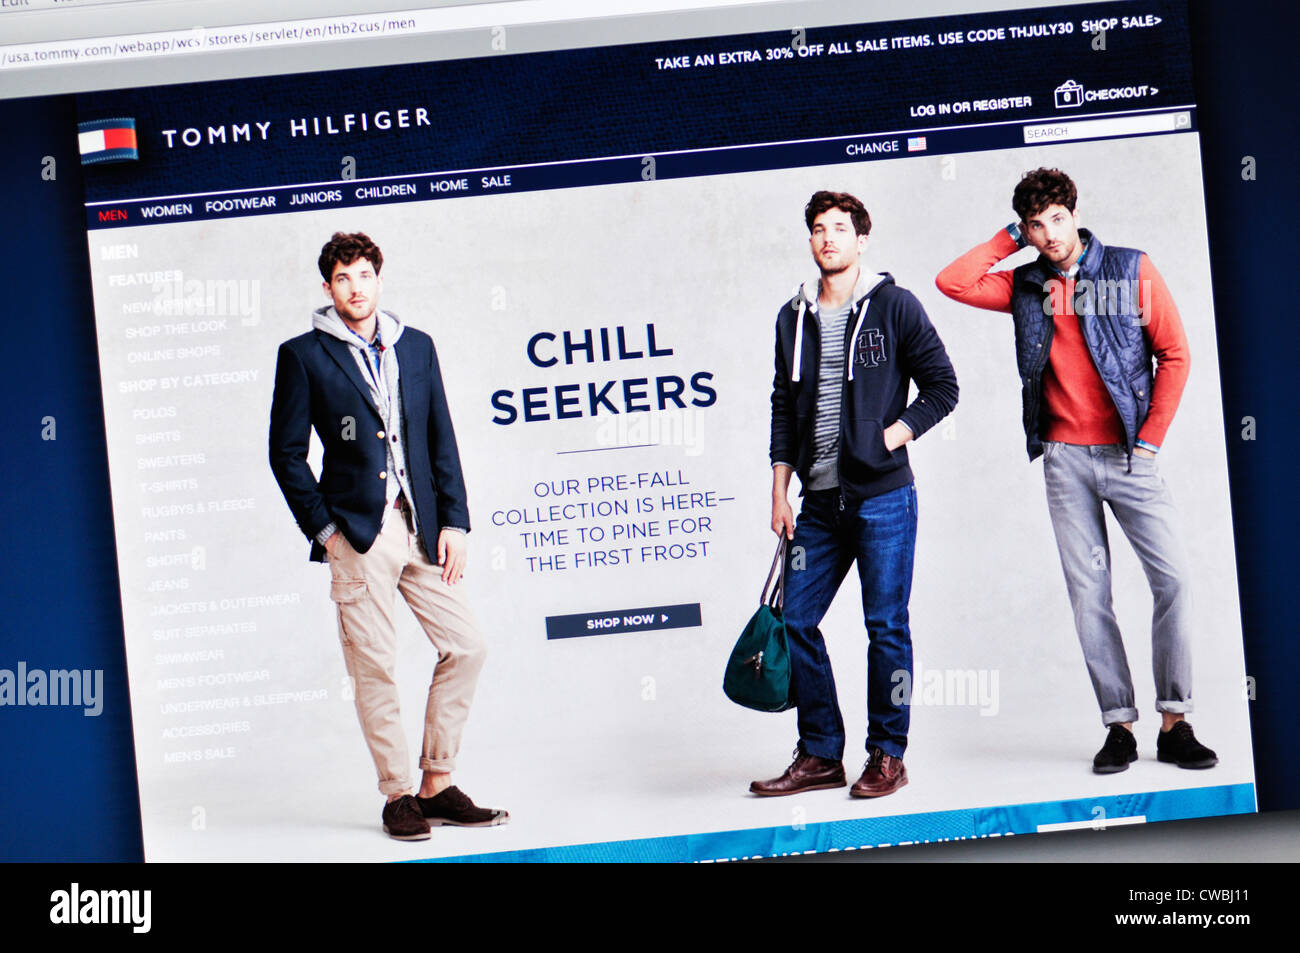 Hilfiger website - clothing, and accessories Stock Photo Alamy